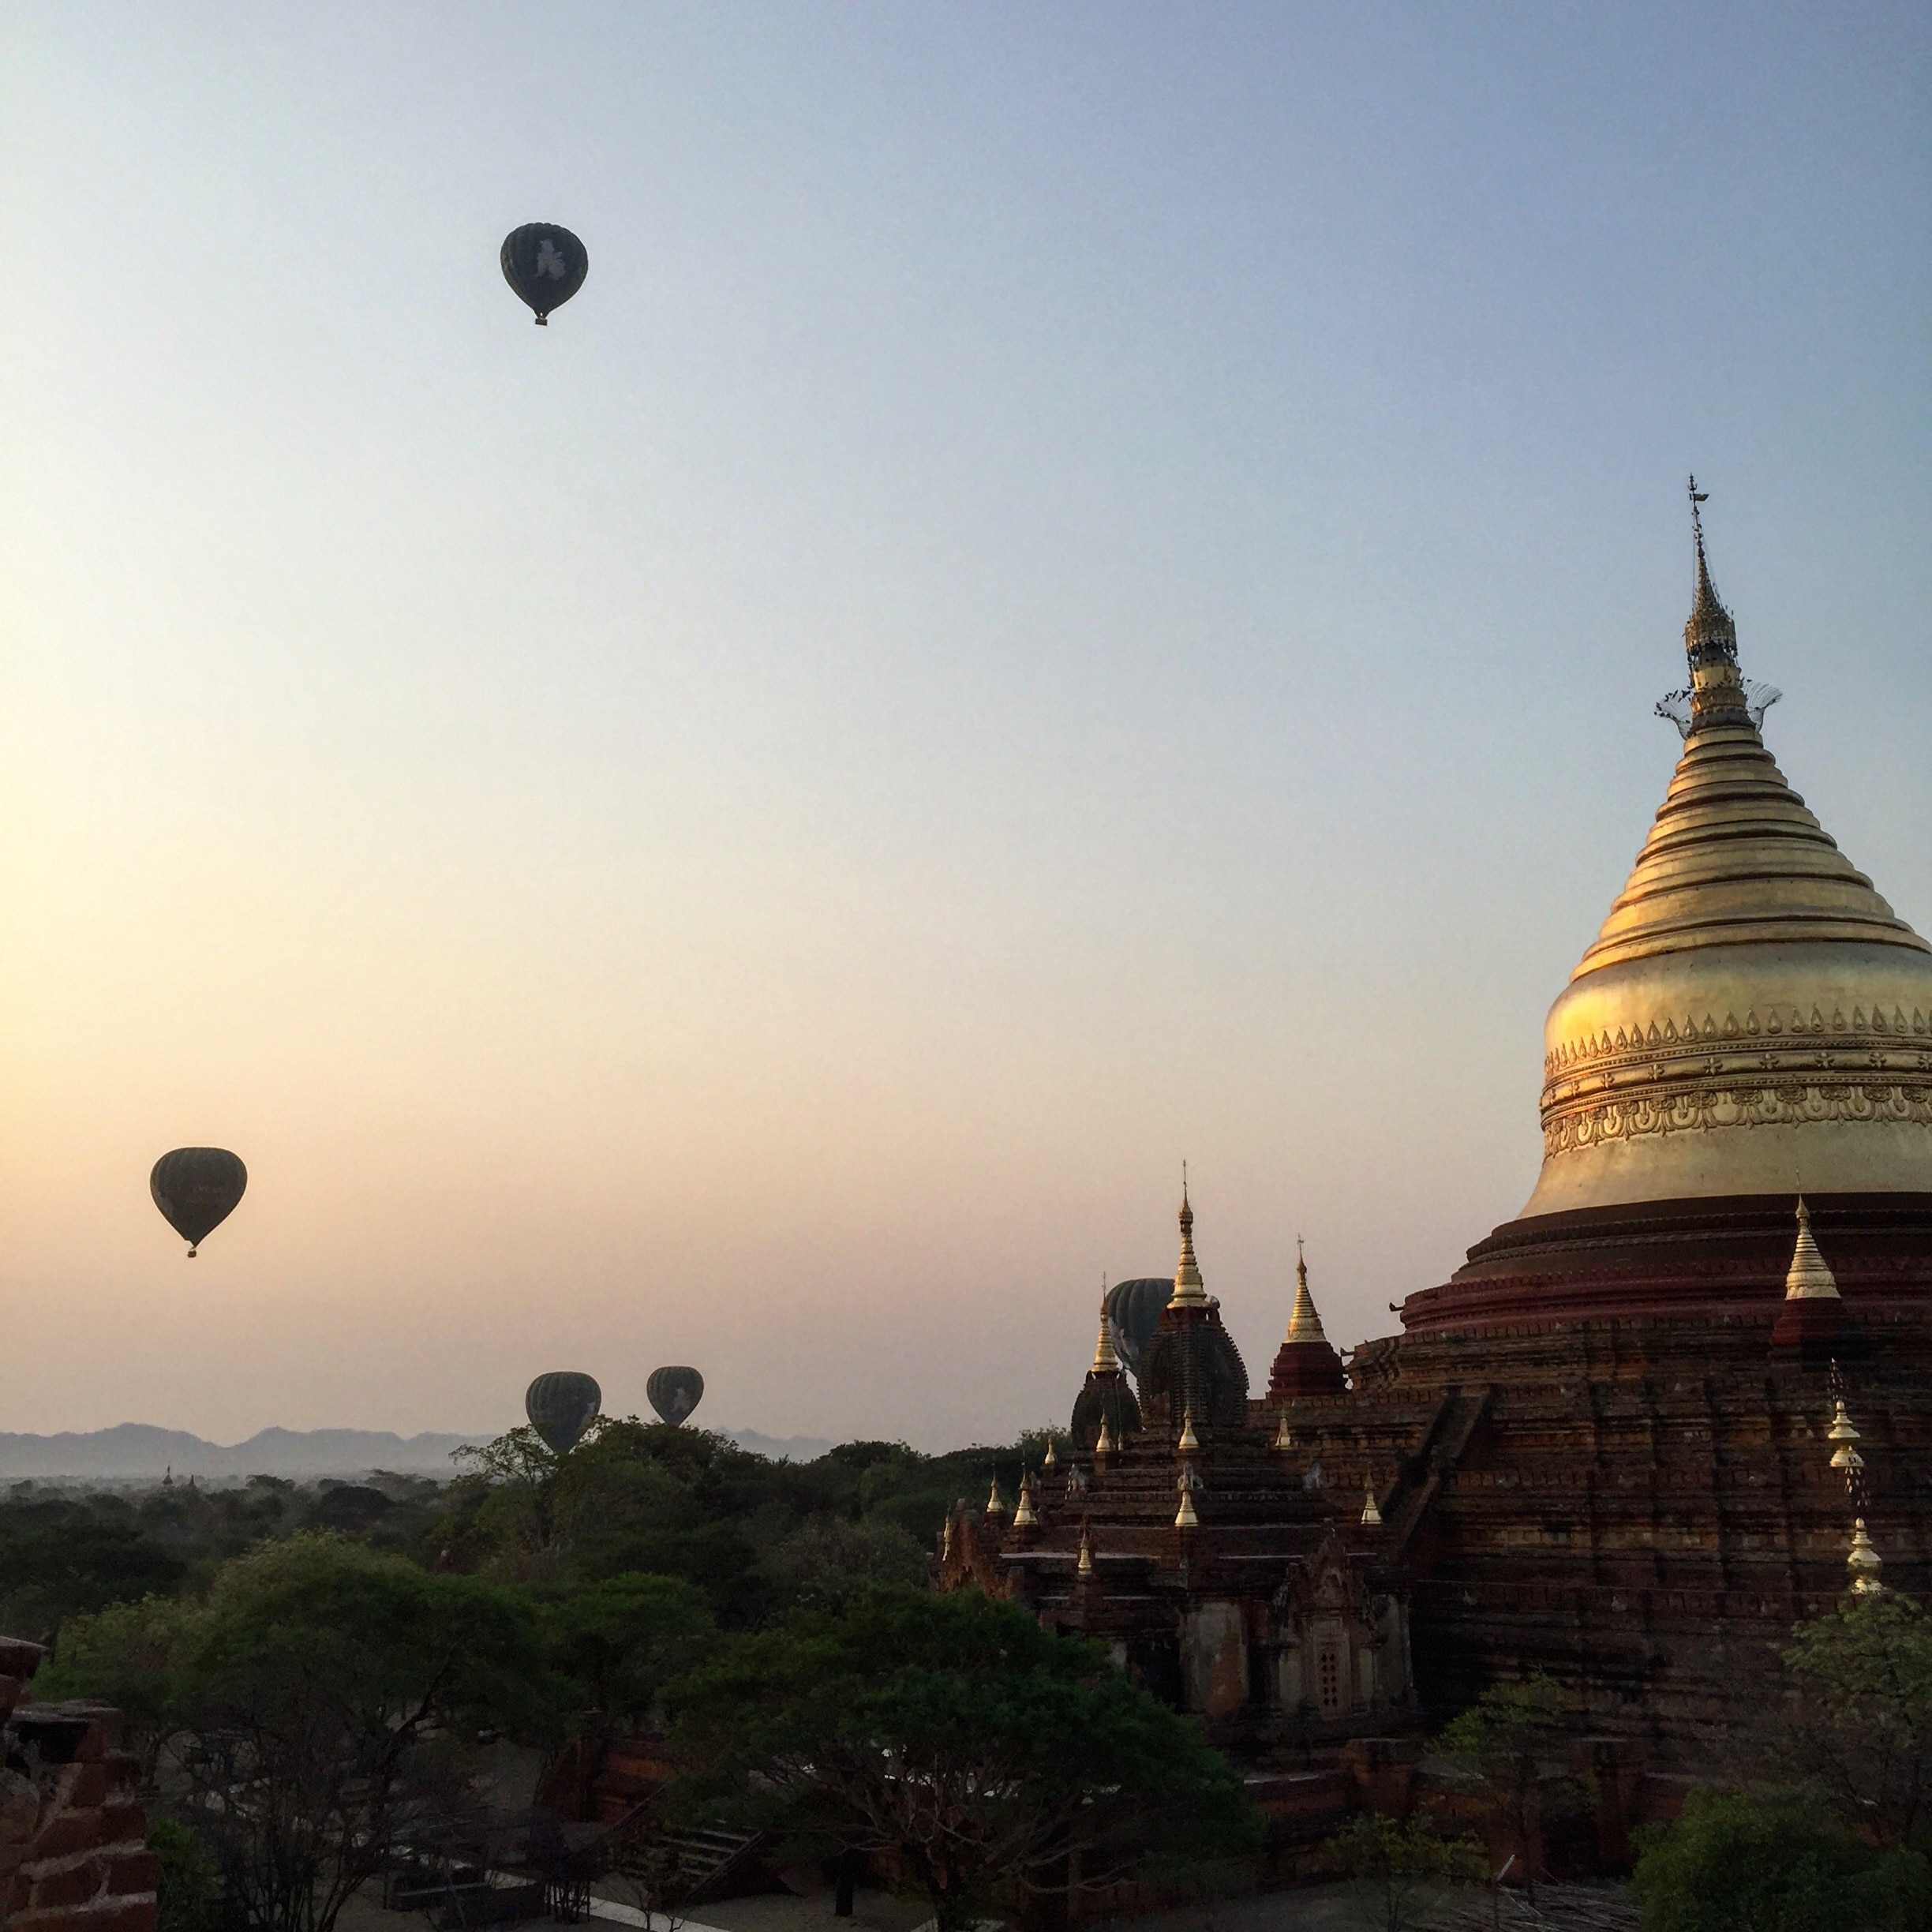 Sunrise hot air balloons create an awe inspiring view. We set off early in order to find a pagoda with a great view. #bagan #myanmar #trover